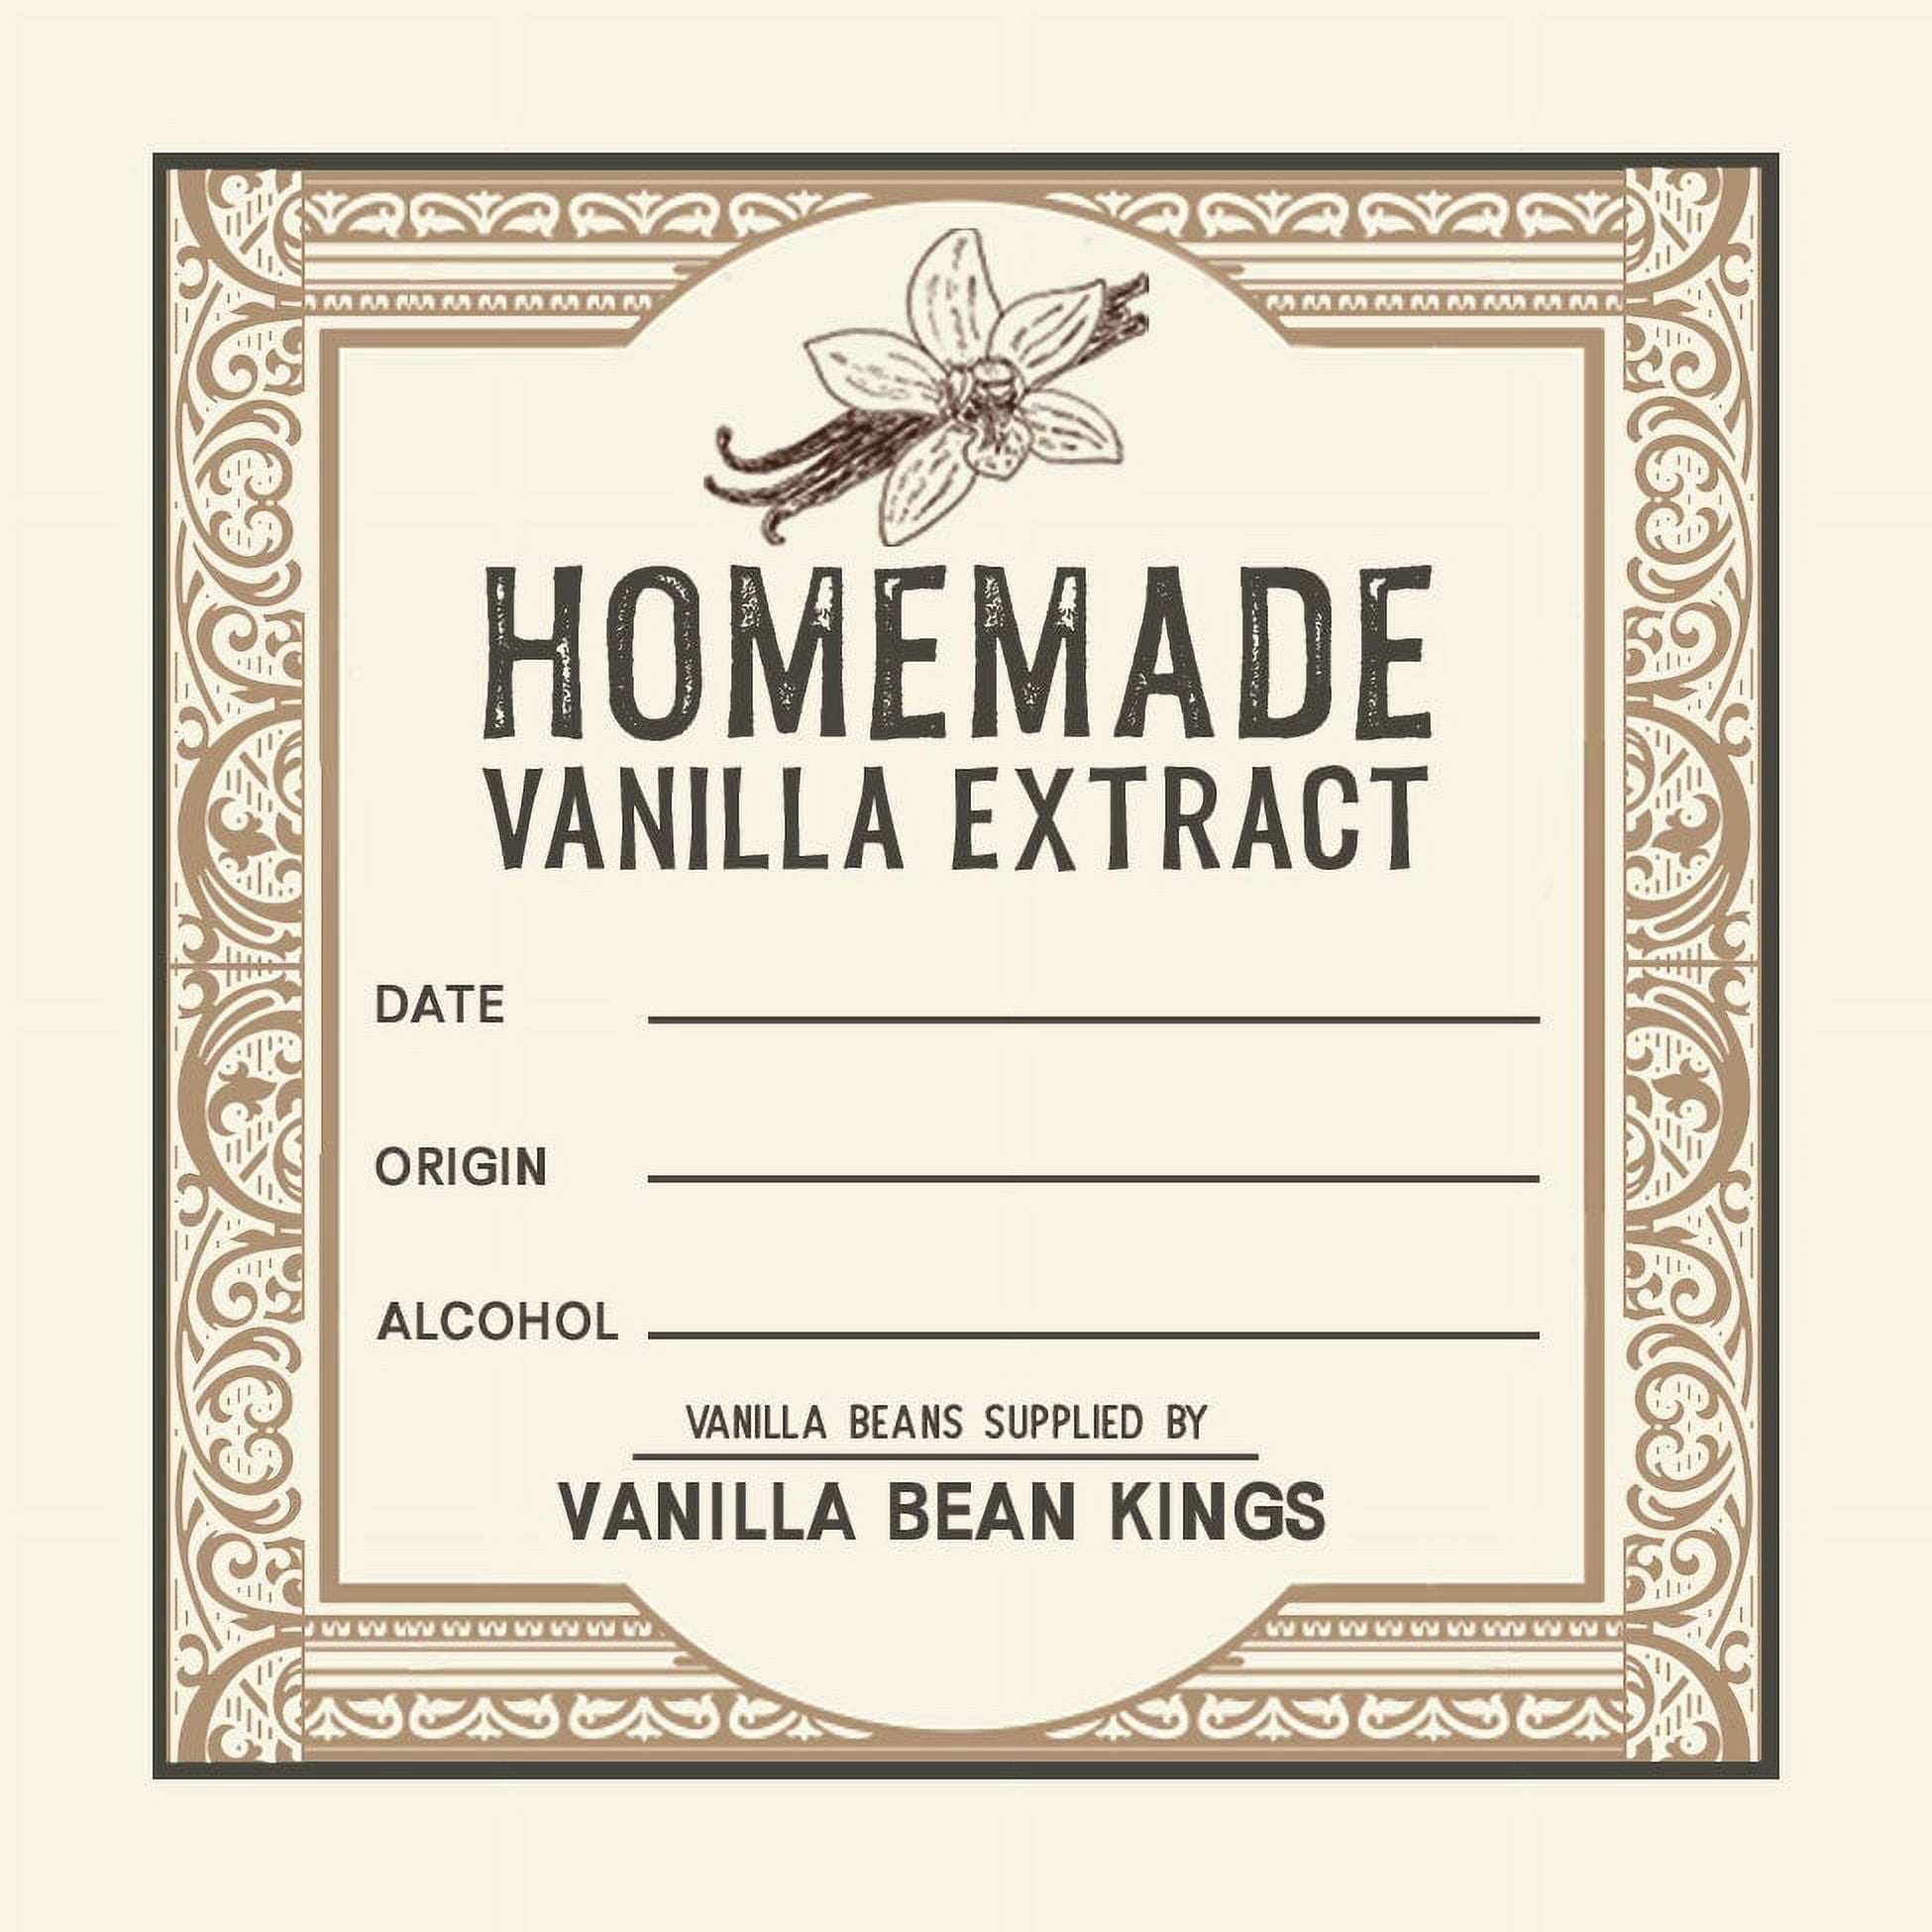 Homemade Vanilla Extract Label (for 4 oz Boston Rounds and Larger) + 6  Accessory Labels - 1.75 x 2.5 - Vanilla Beans & Alcohol - Handmade by